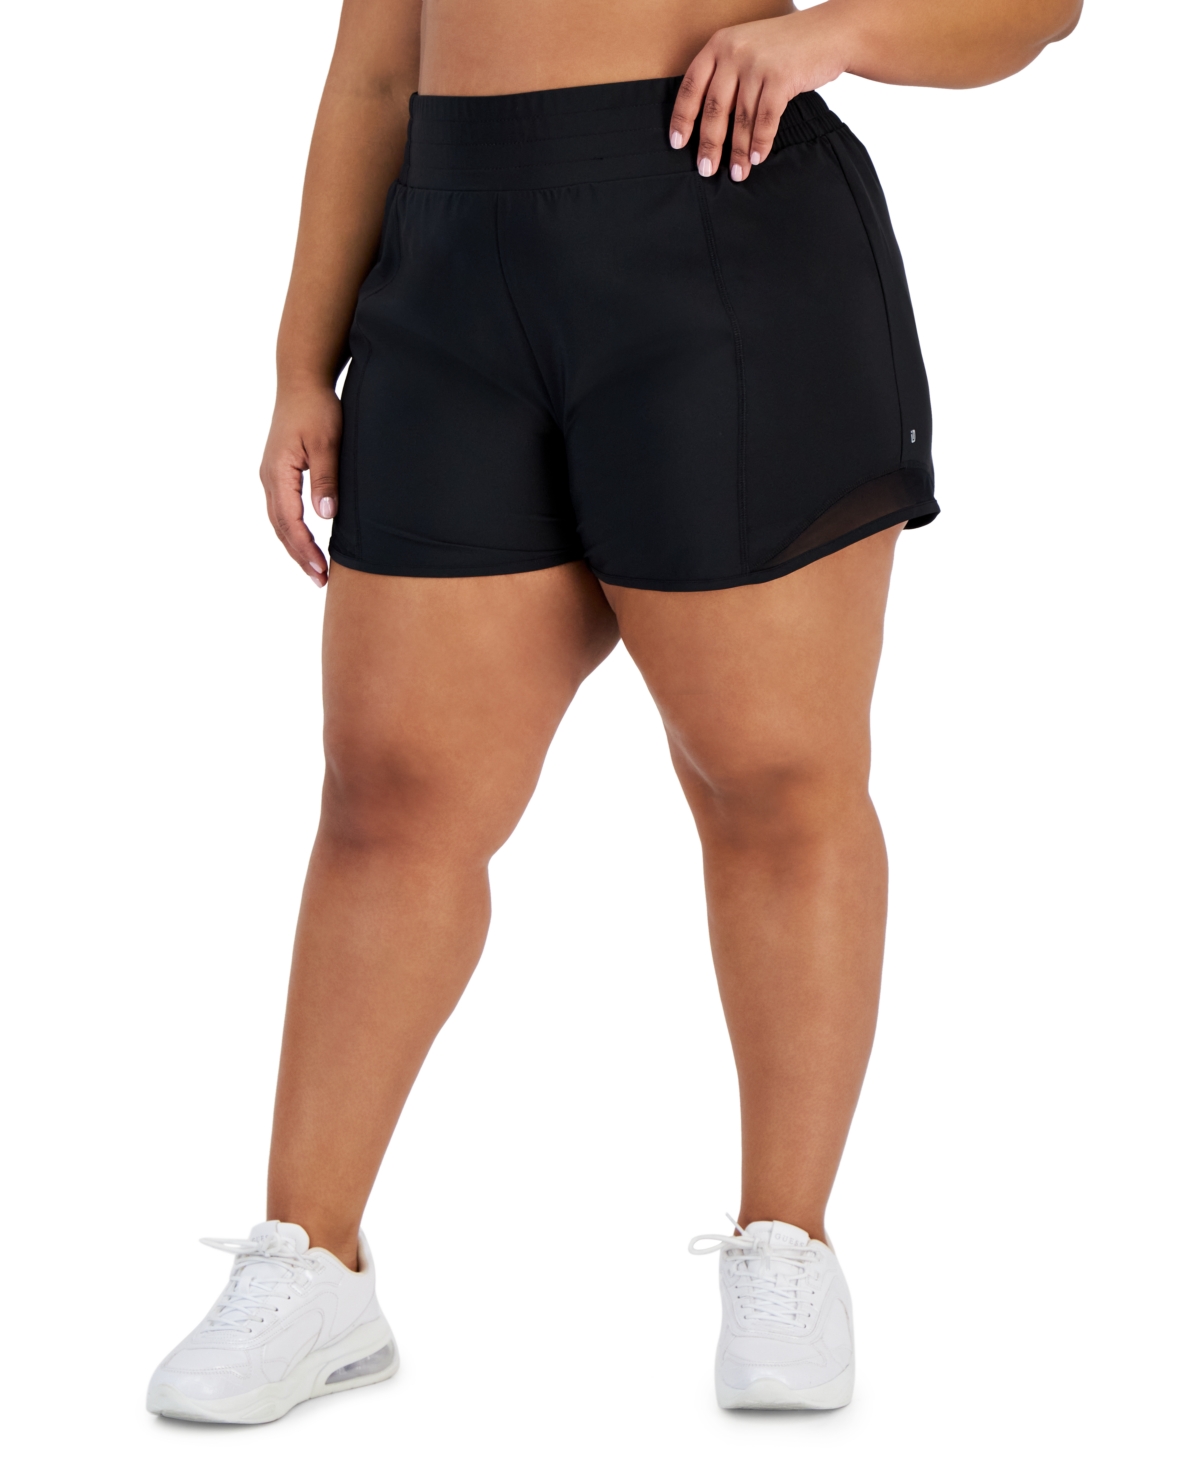 Plus Size Solid Elastic-Back Woven Running Shorts, Created for Macy's - Bright White